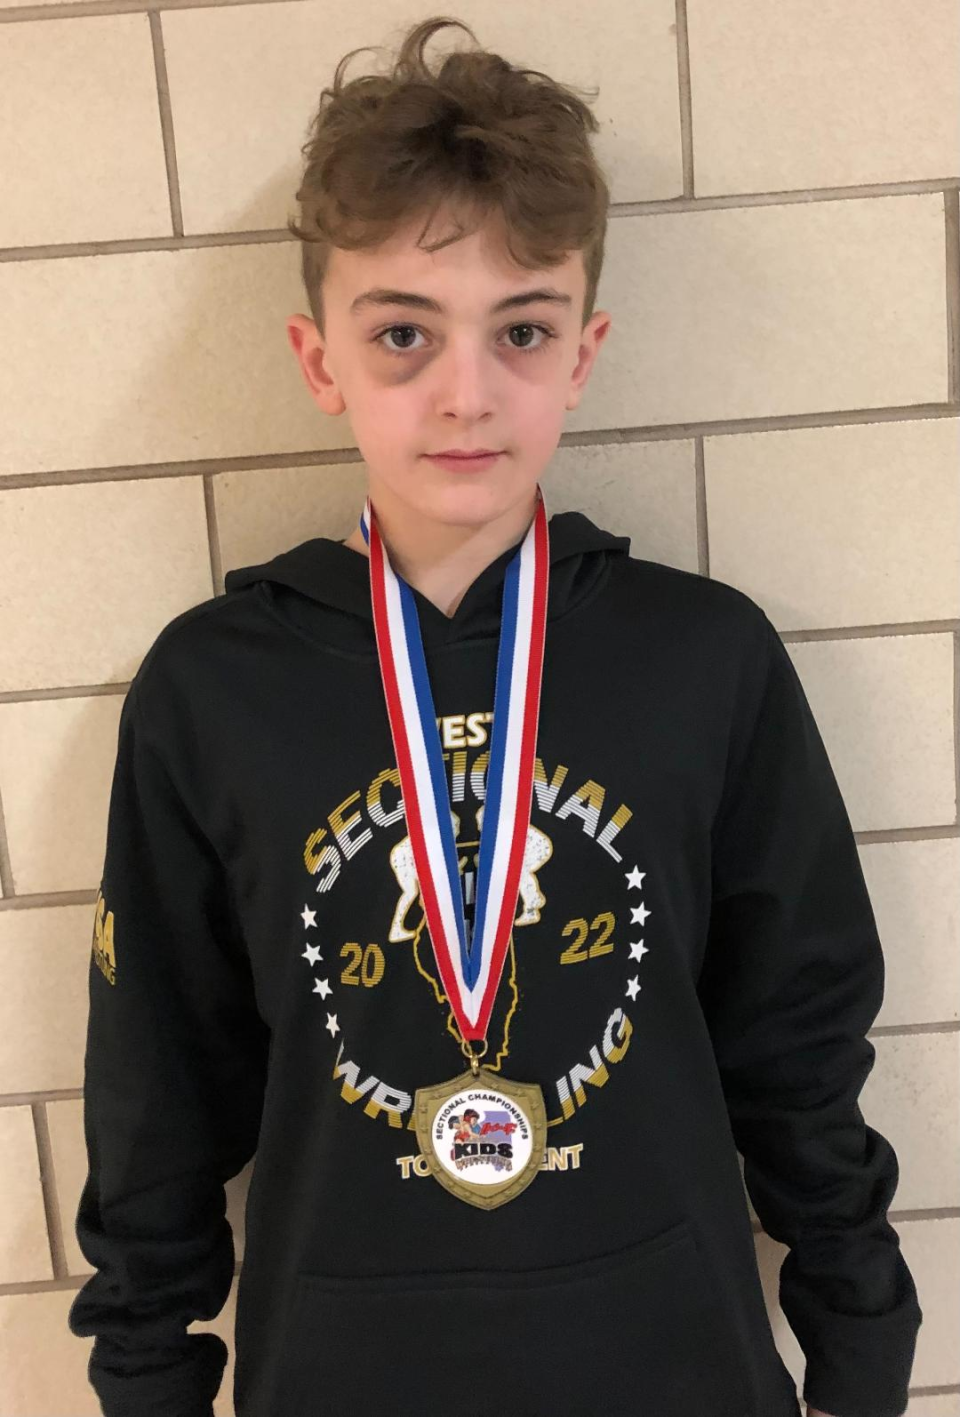 Judah Hedges placed Second at 76 pounds—Intermediate Division.